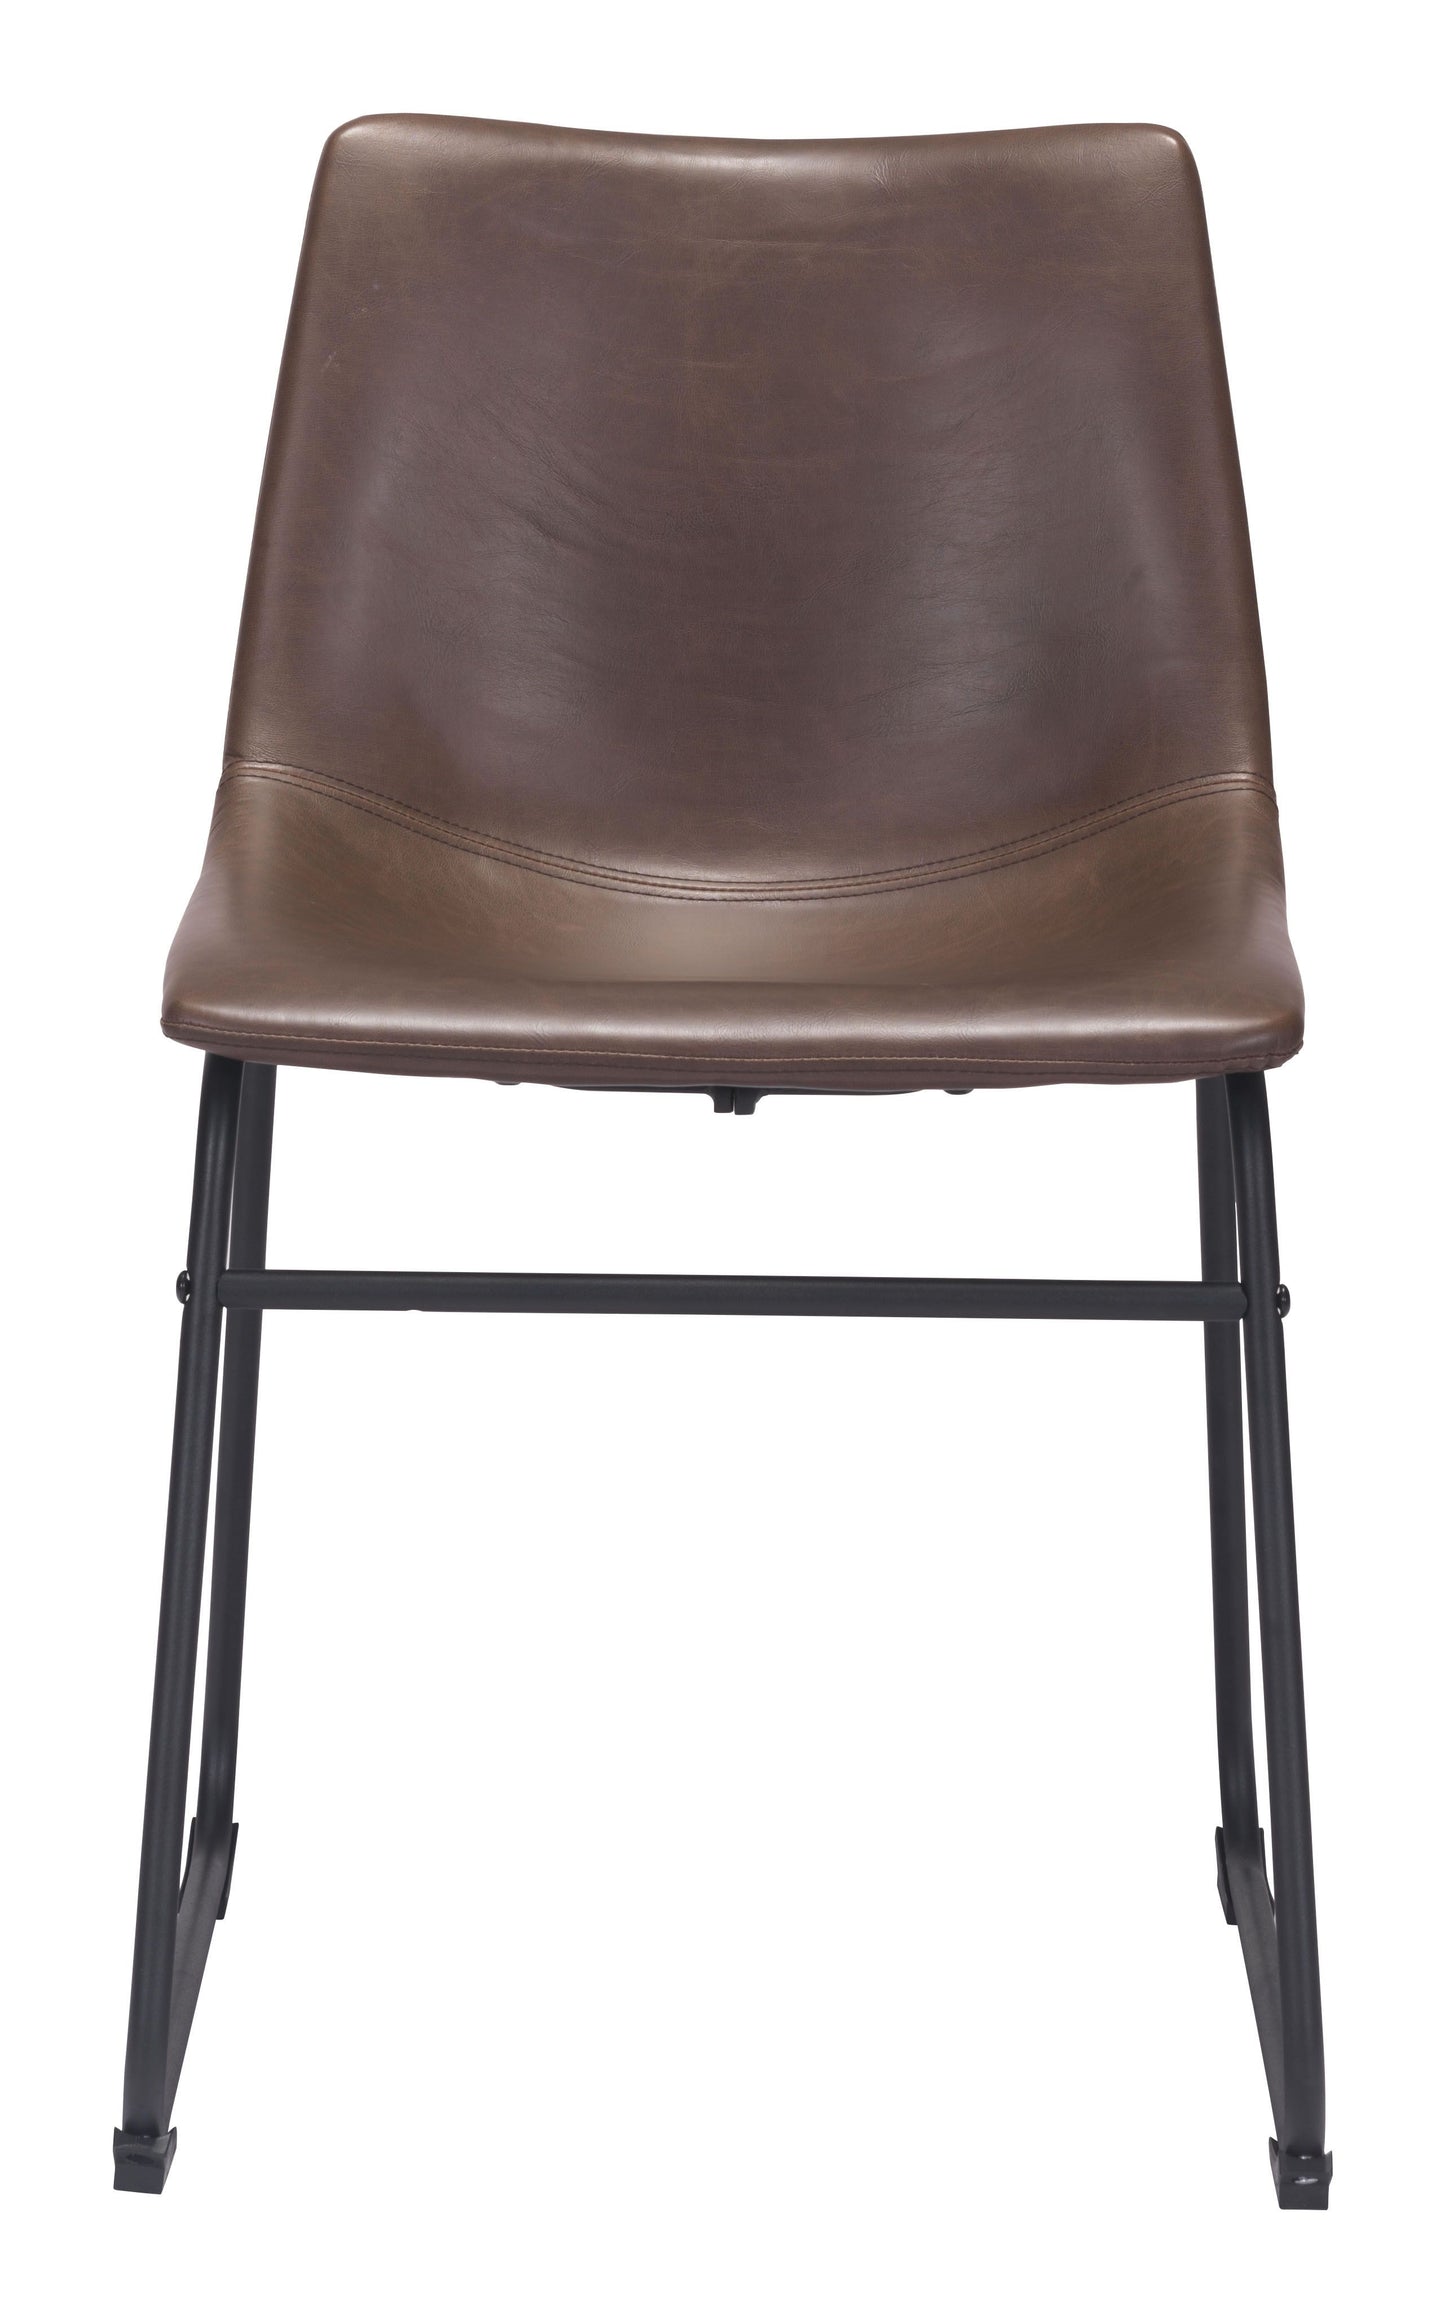 Smiths Office Chair Black